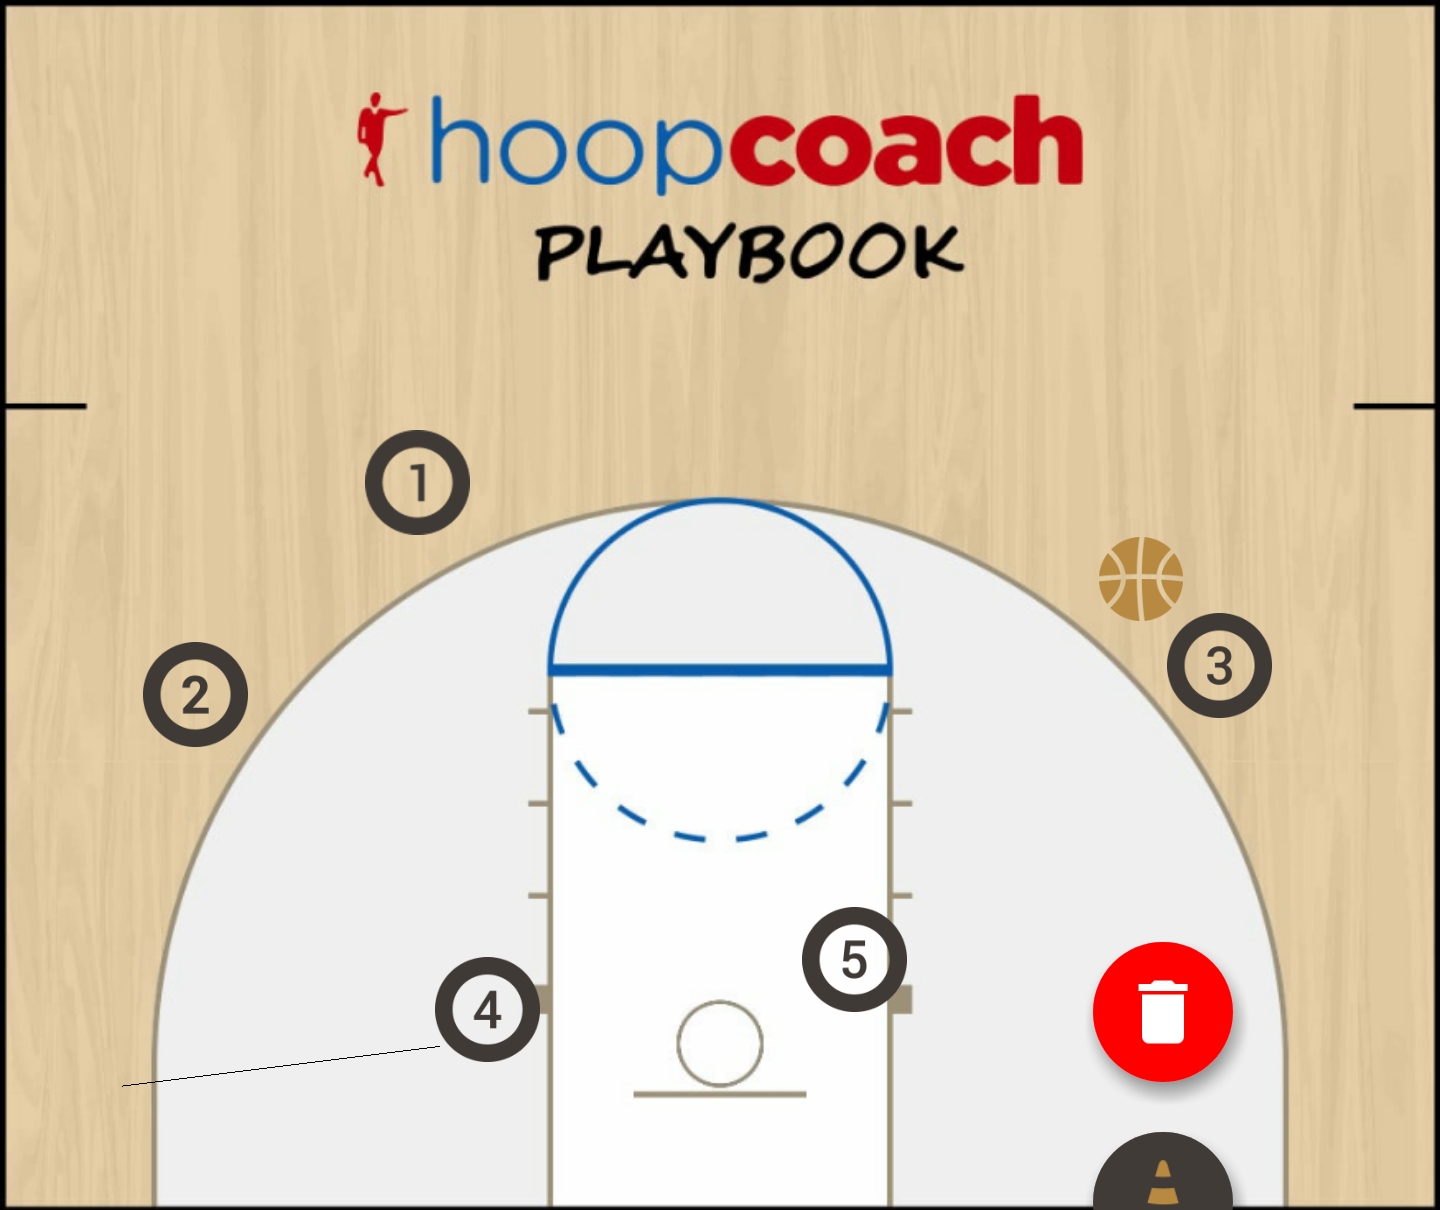 Basketball Play Motion Man to Man Offense offense set to get the ball moving against man